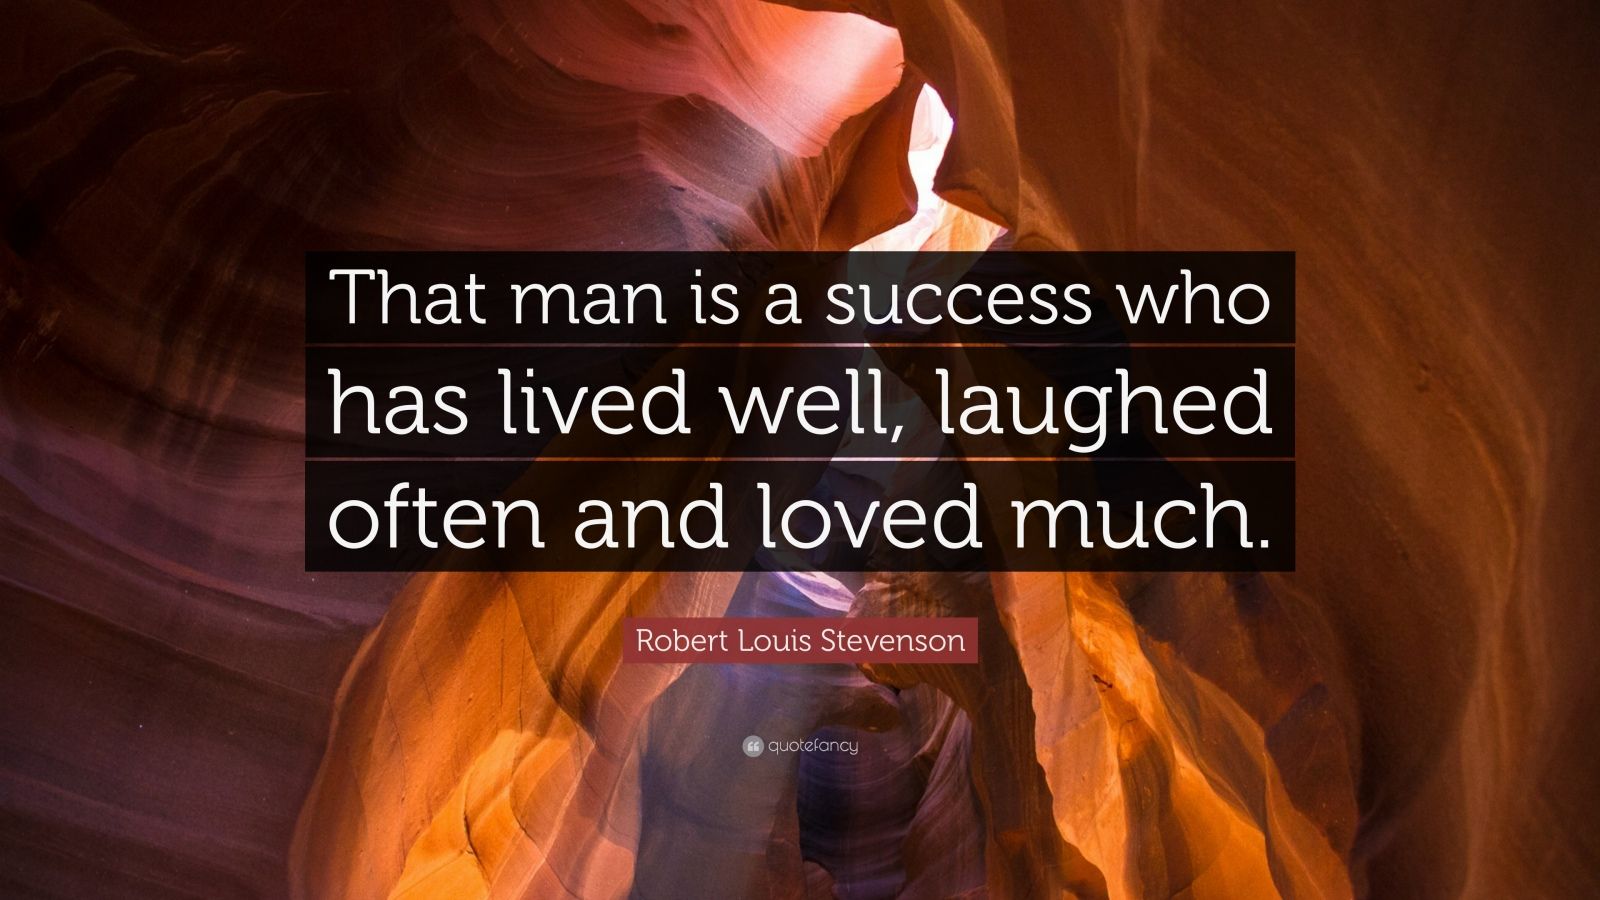 Robert Louis Stevenson Quote: “That man is a success who has lived well, laughed often and loved ...